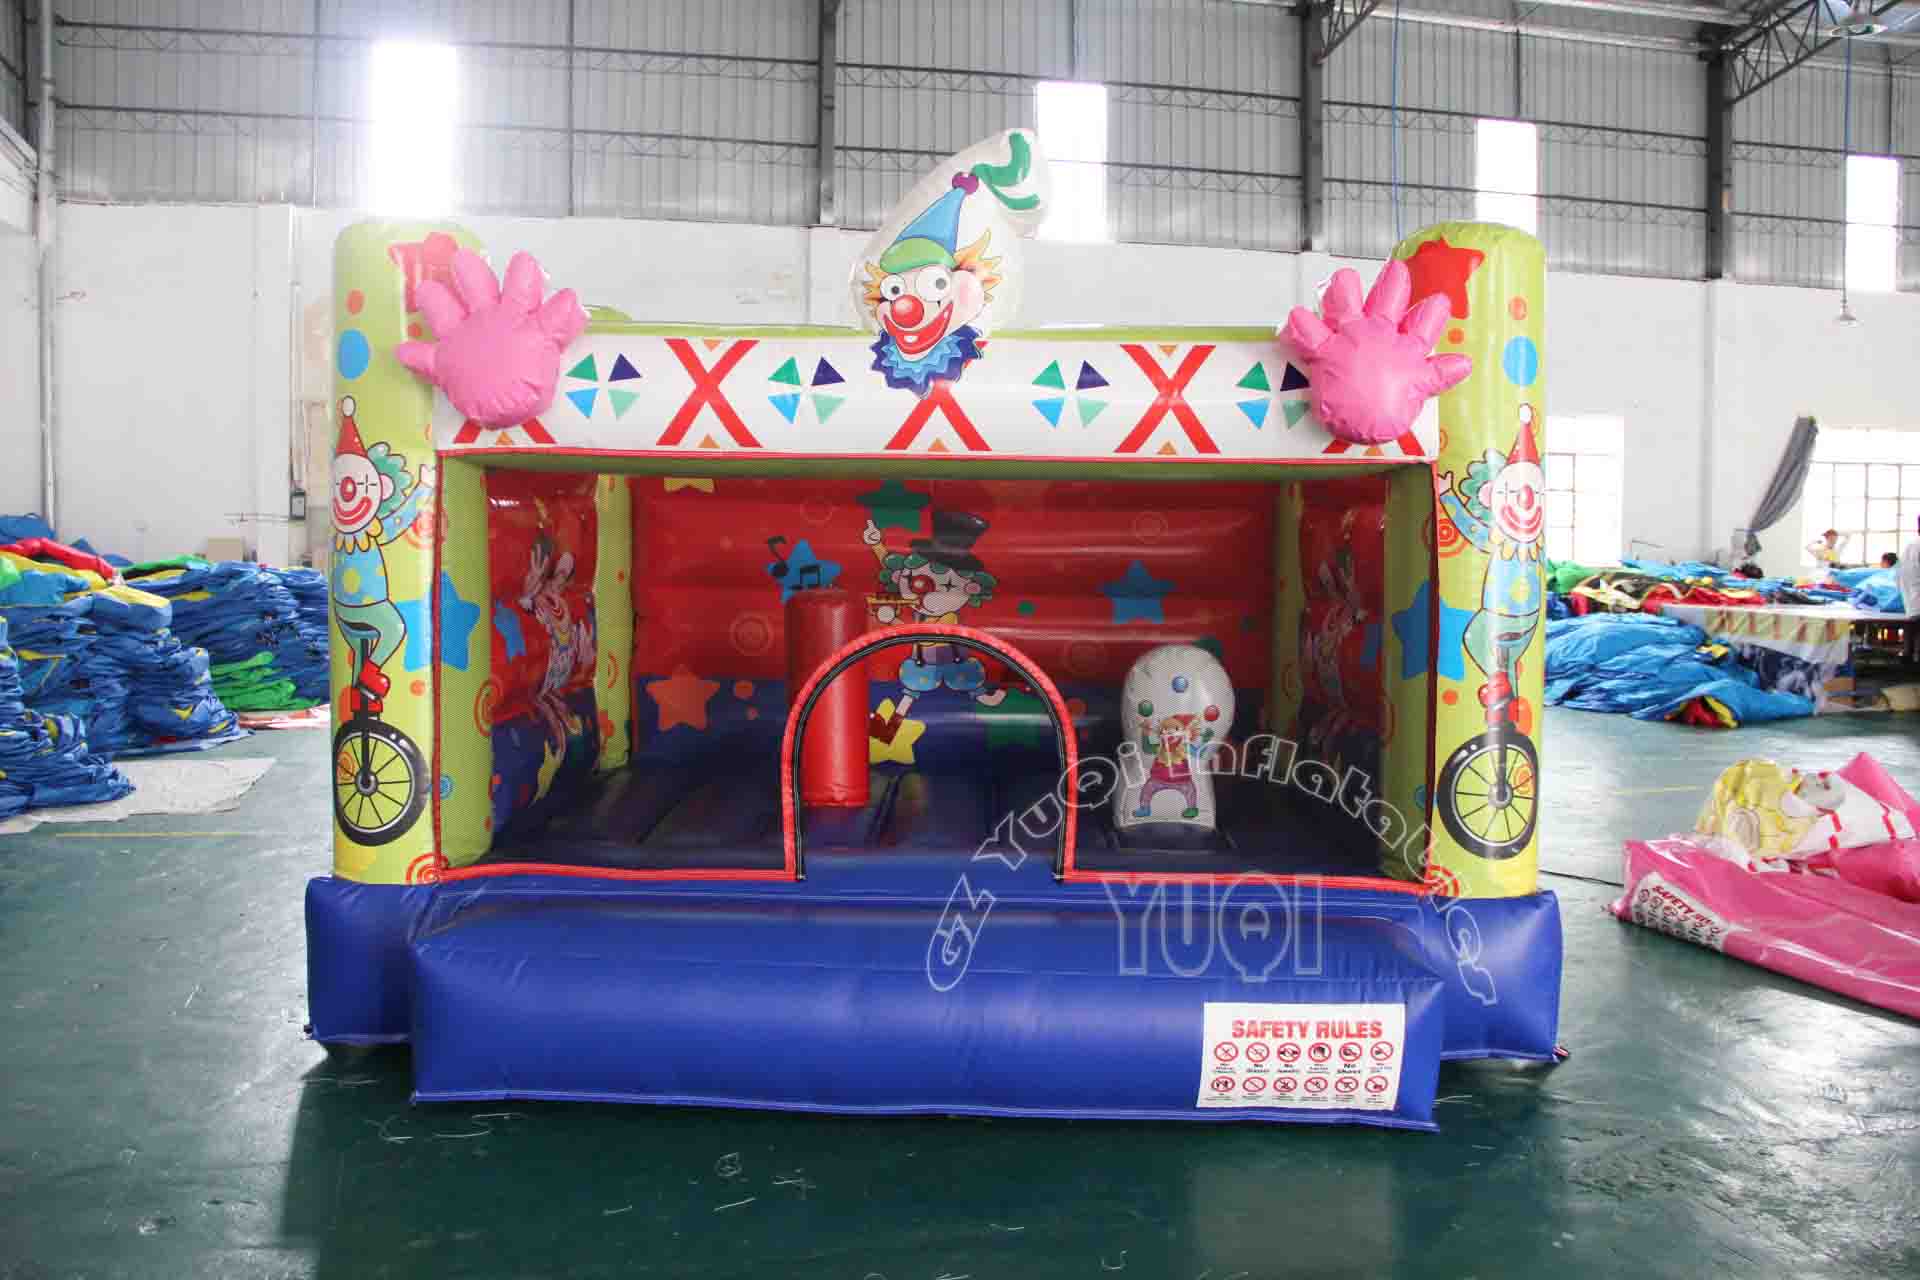 YUQI-Yq56 Happy Clown Inflatable Bouncer For Kids | Inflatable House